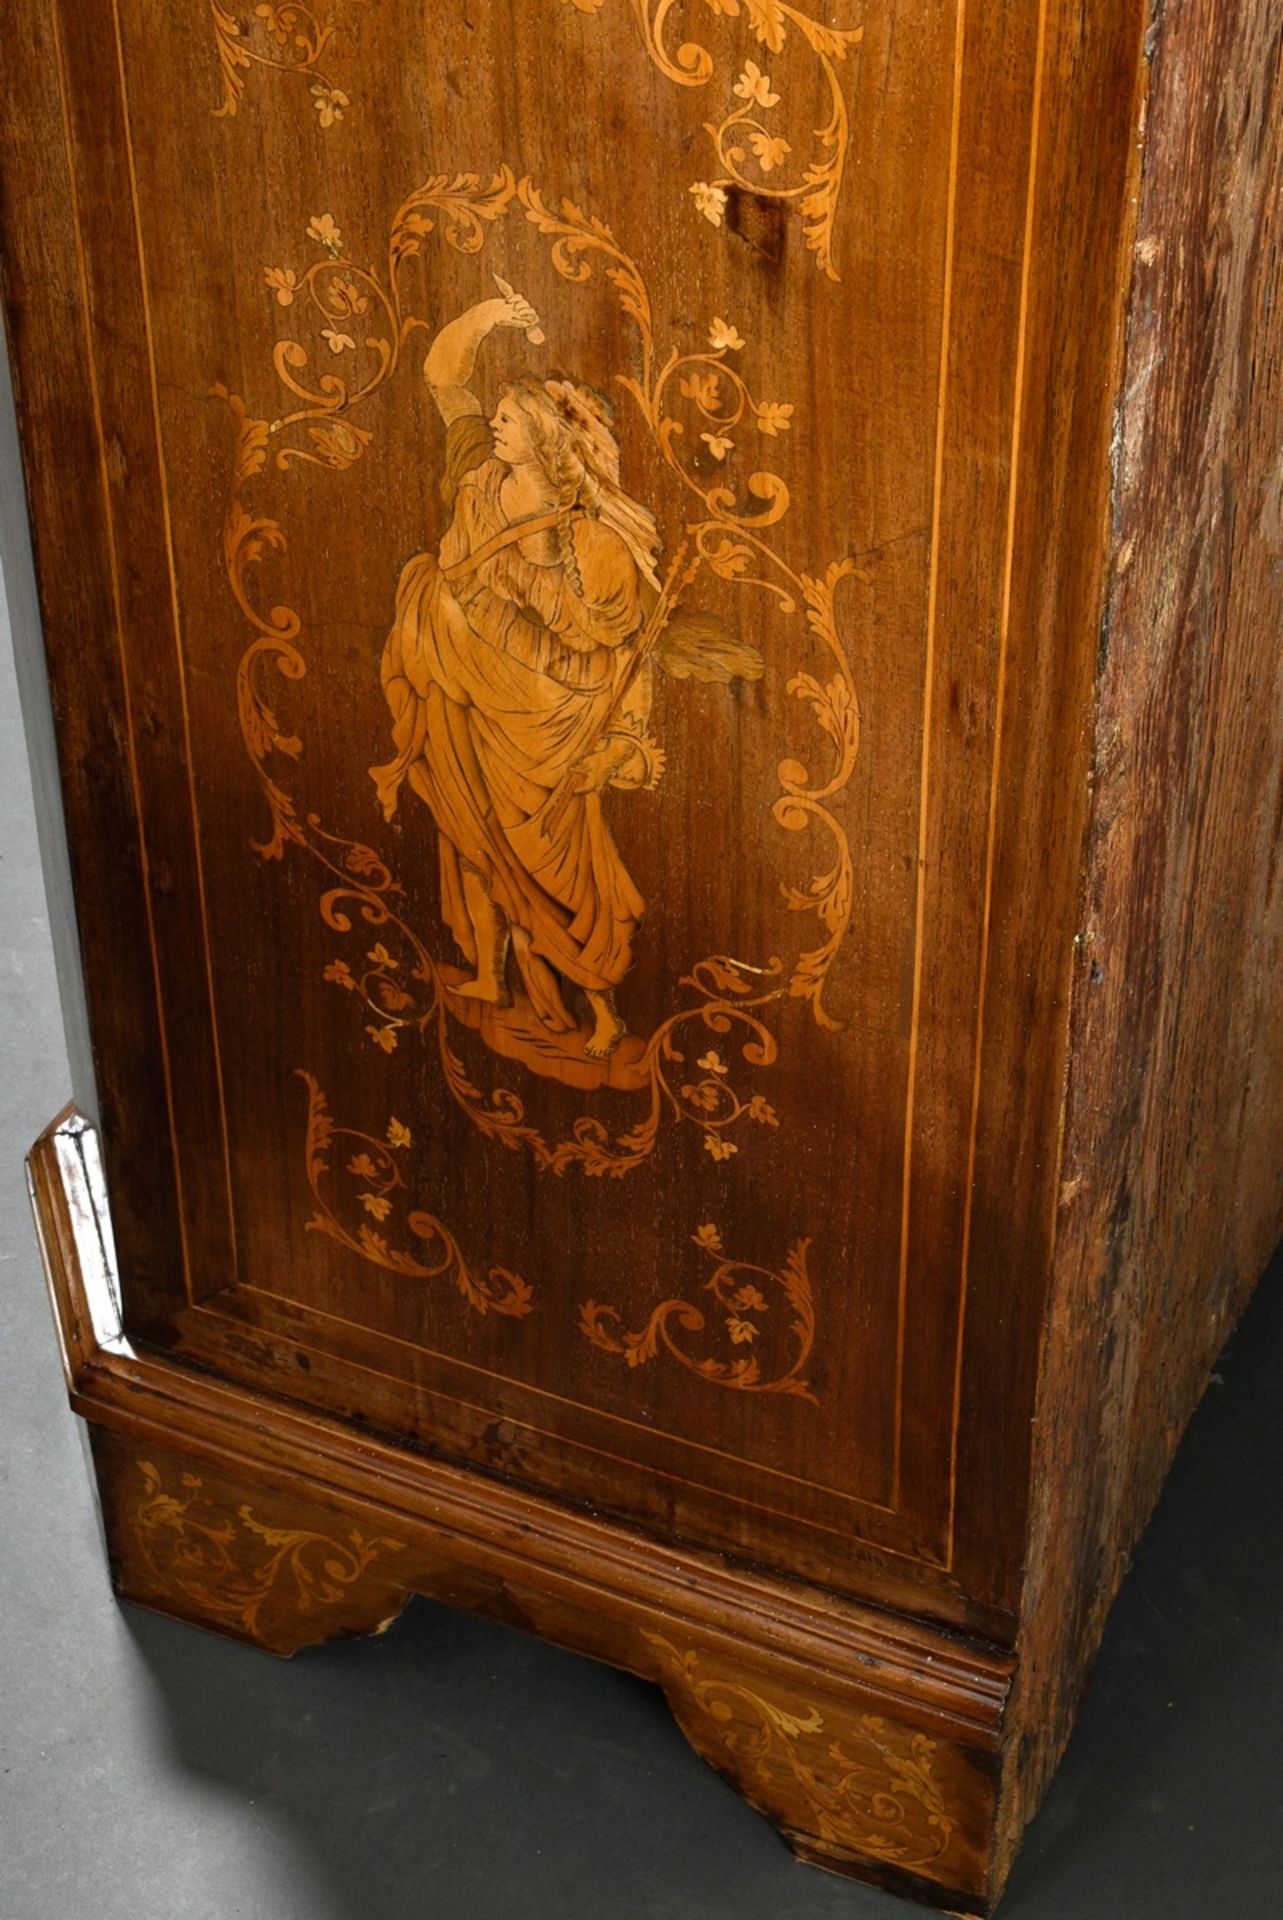 Splendid single-door cabinet with detailed inlays "Allegorical female figures" in classicistic orna - Image 13 of 13